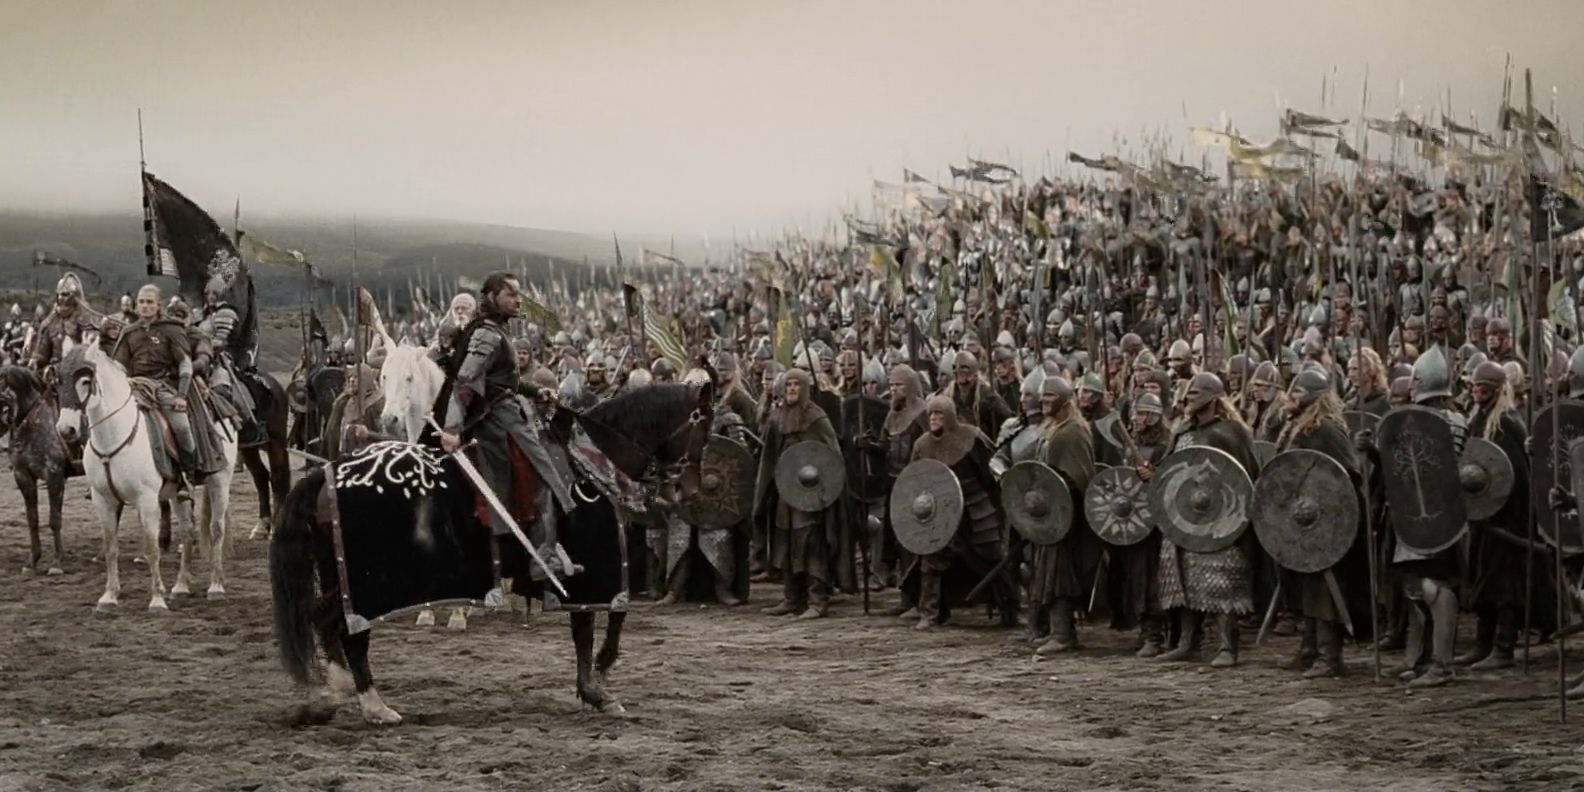 Aragorn at the Battle of the Black Gate